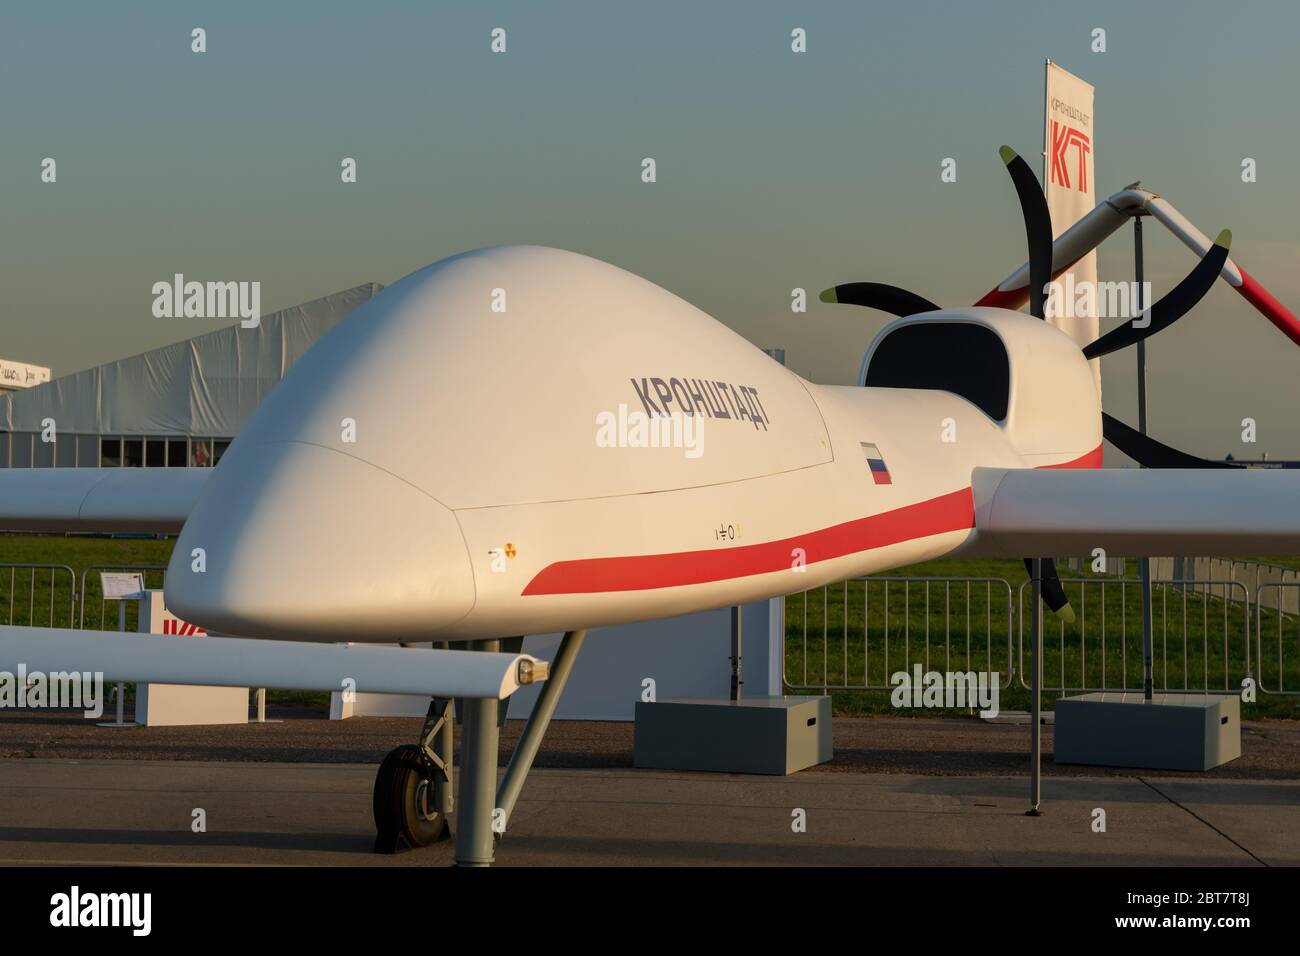 August 30, 2019. Zhukovsky, Russia.Russian multi-purpose heavy-class unmanned aerial vehicle (UAV) developed by company 'Kronstadt' (AFK Sistema) at t Stock Photo